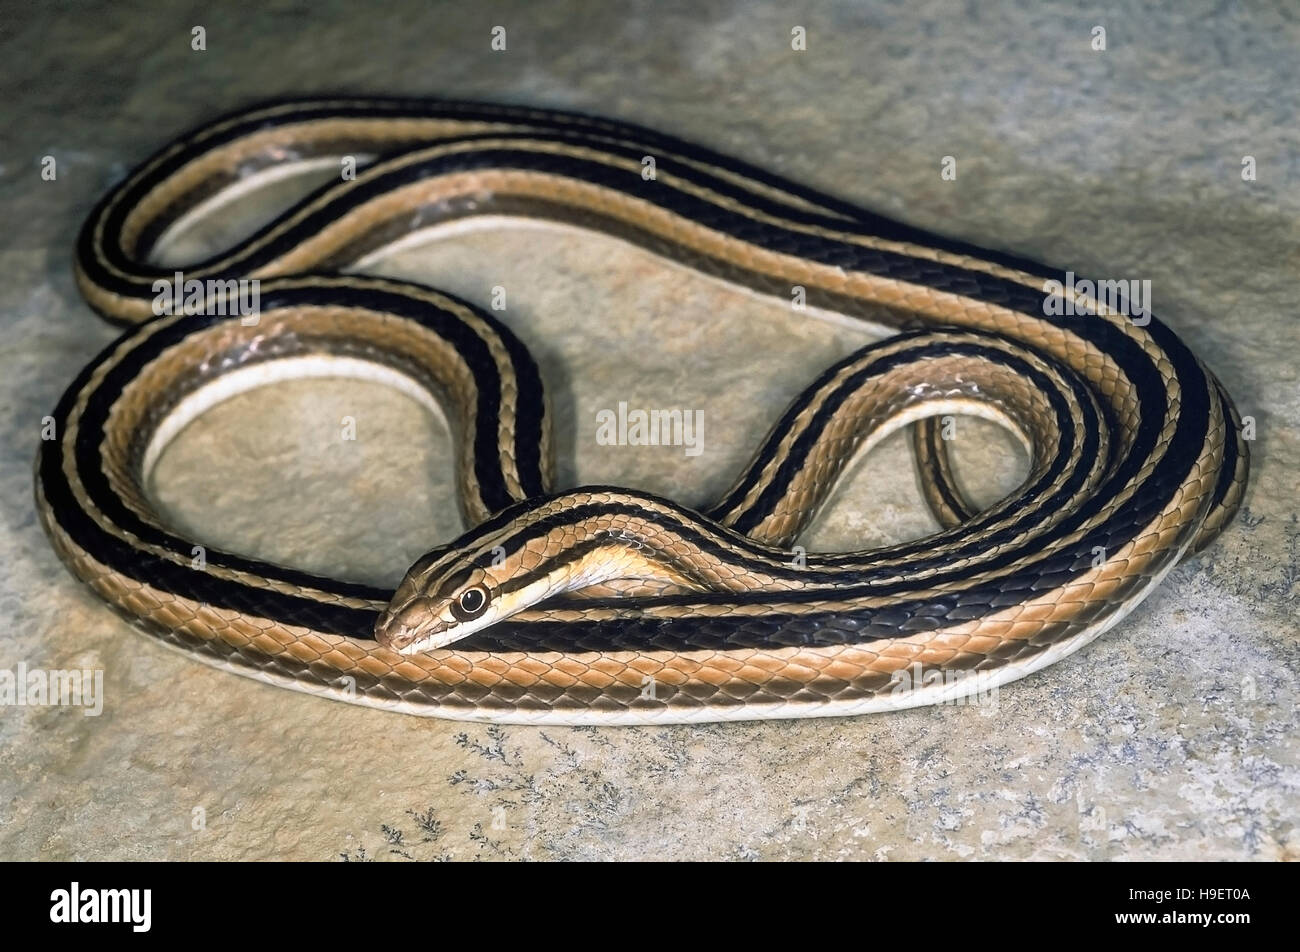 LEITH'S SAND SNAKE Psammophis leithii from Ahmedabad, Gujarat, India. Entire body - coiled, head in front. Stock Photo